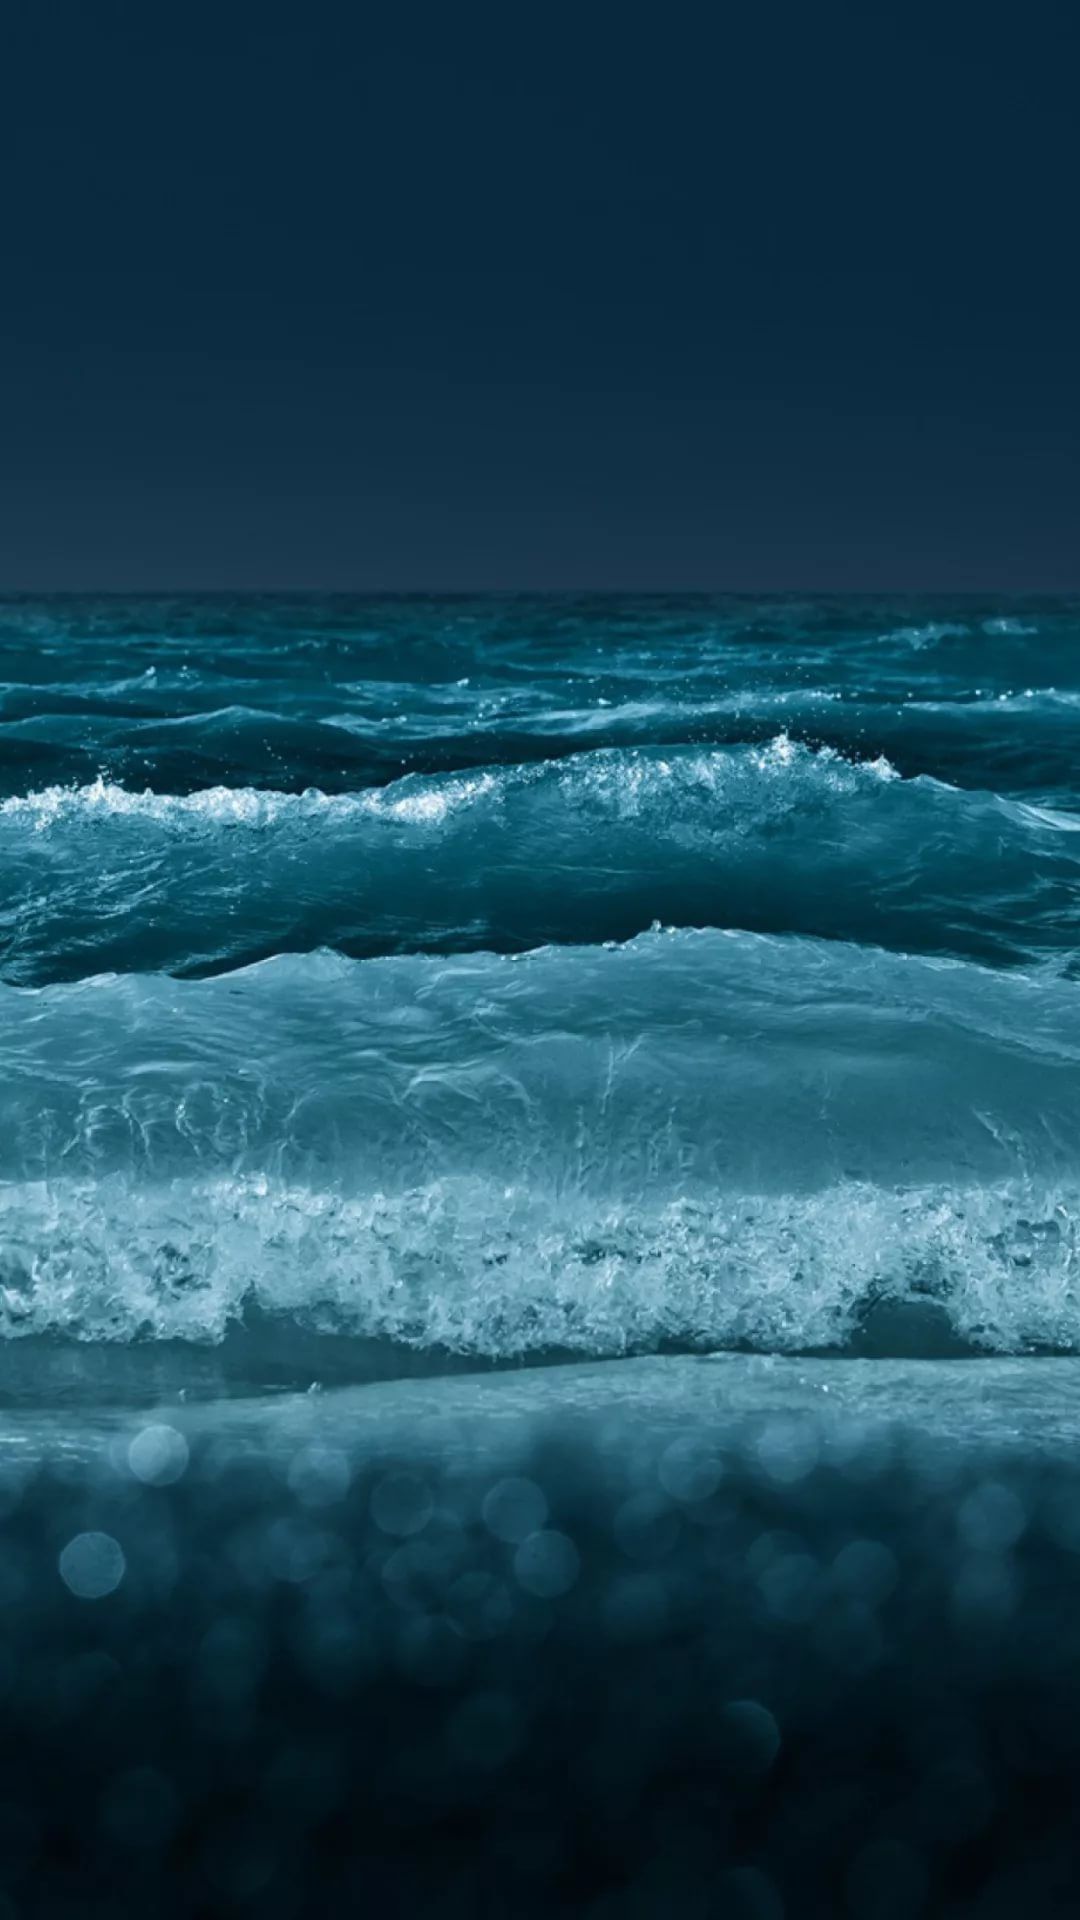 Ocean wallpaper for android